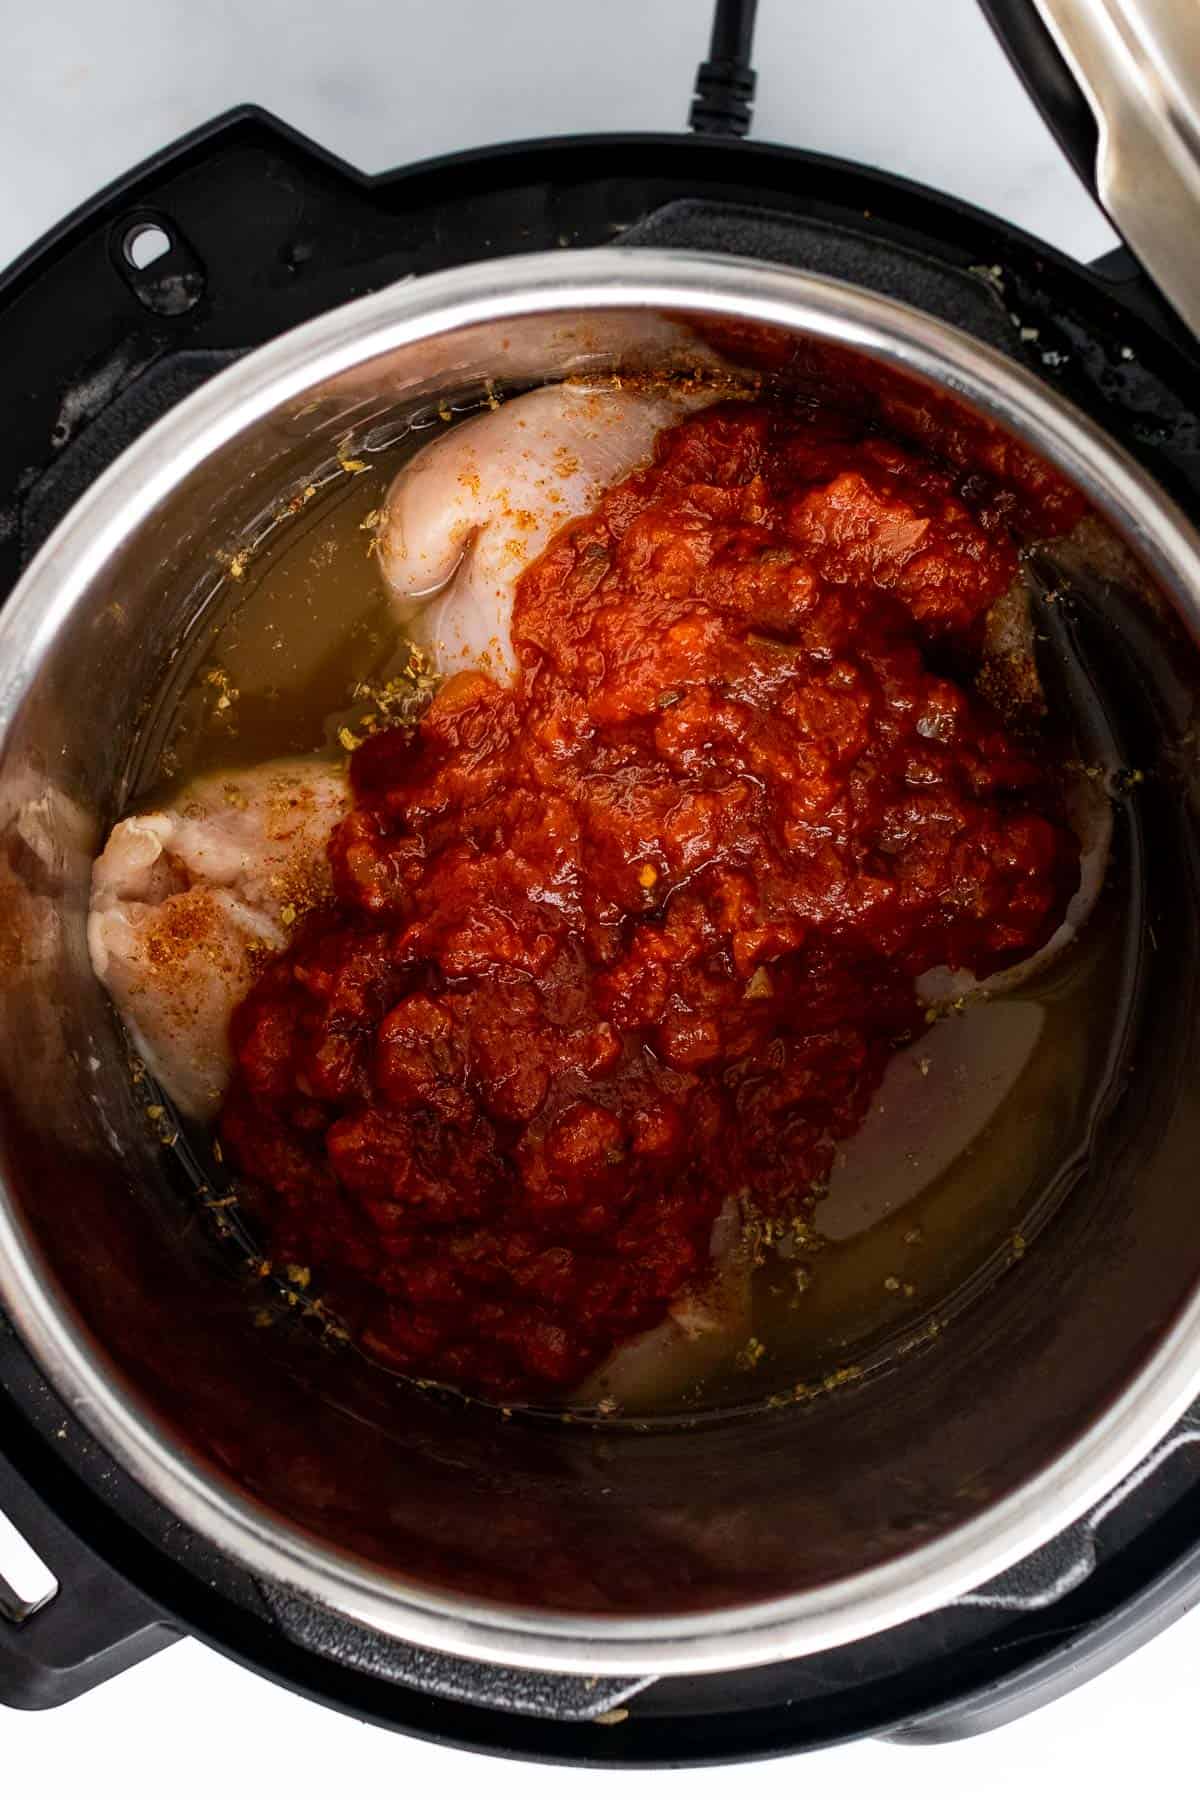 Salsa poured over the chicken breasts in the Instant Pot